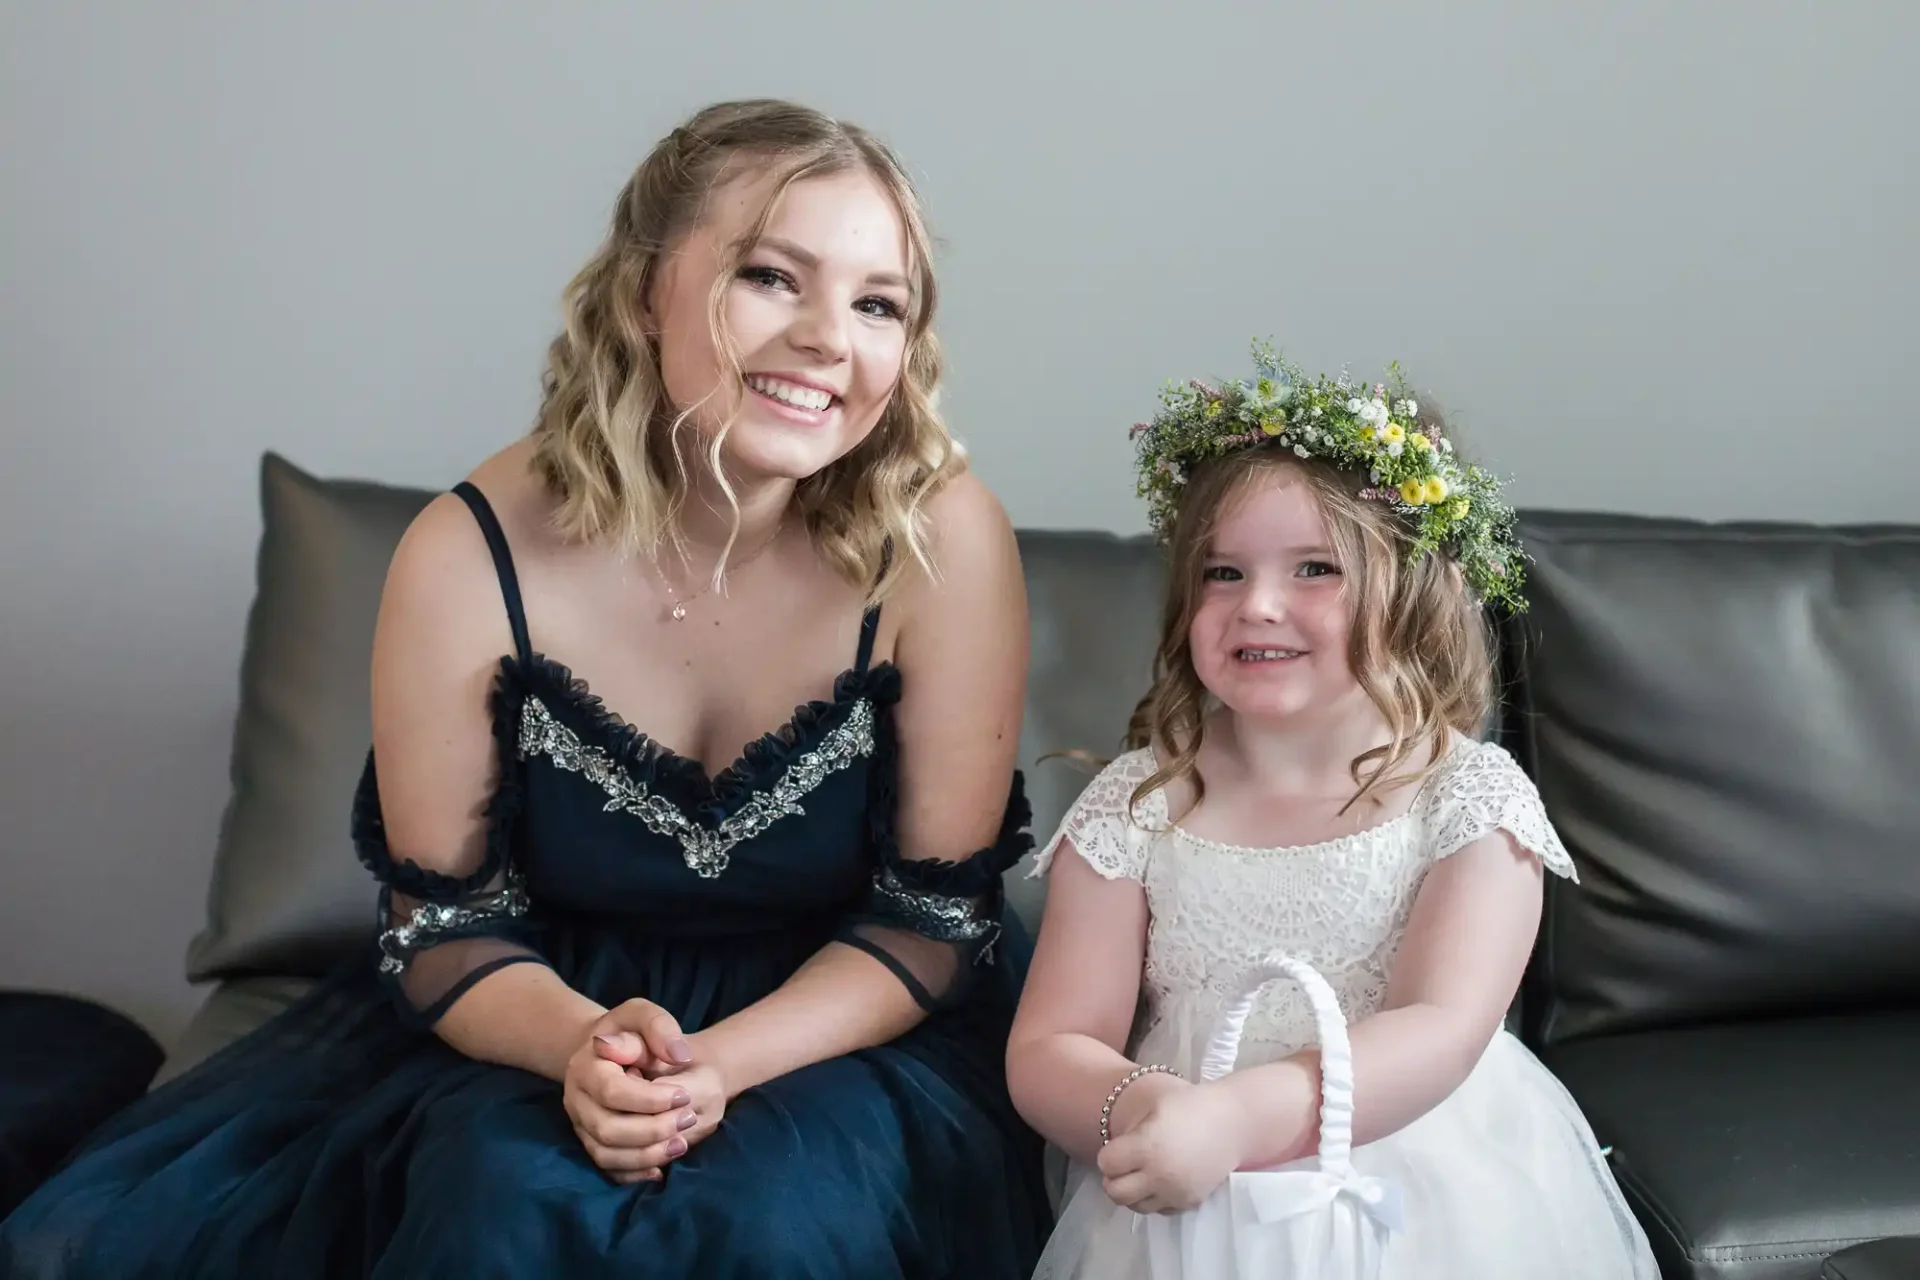 Two smiling females, an adult and a child, sitting on a couch. the adult wears a dark dress and the child dons a white dress with a floral headband.